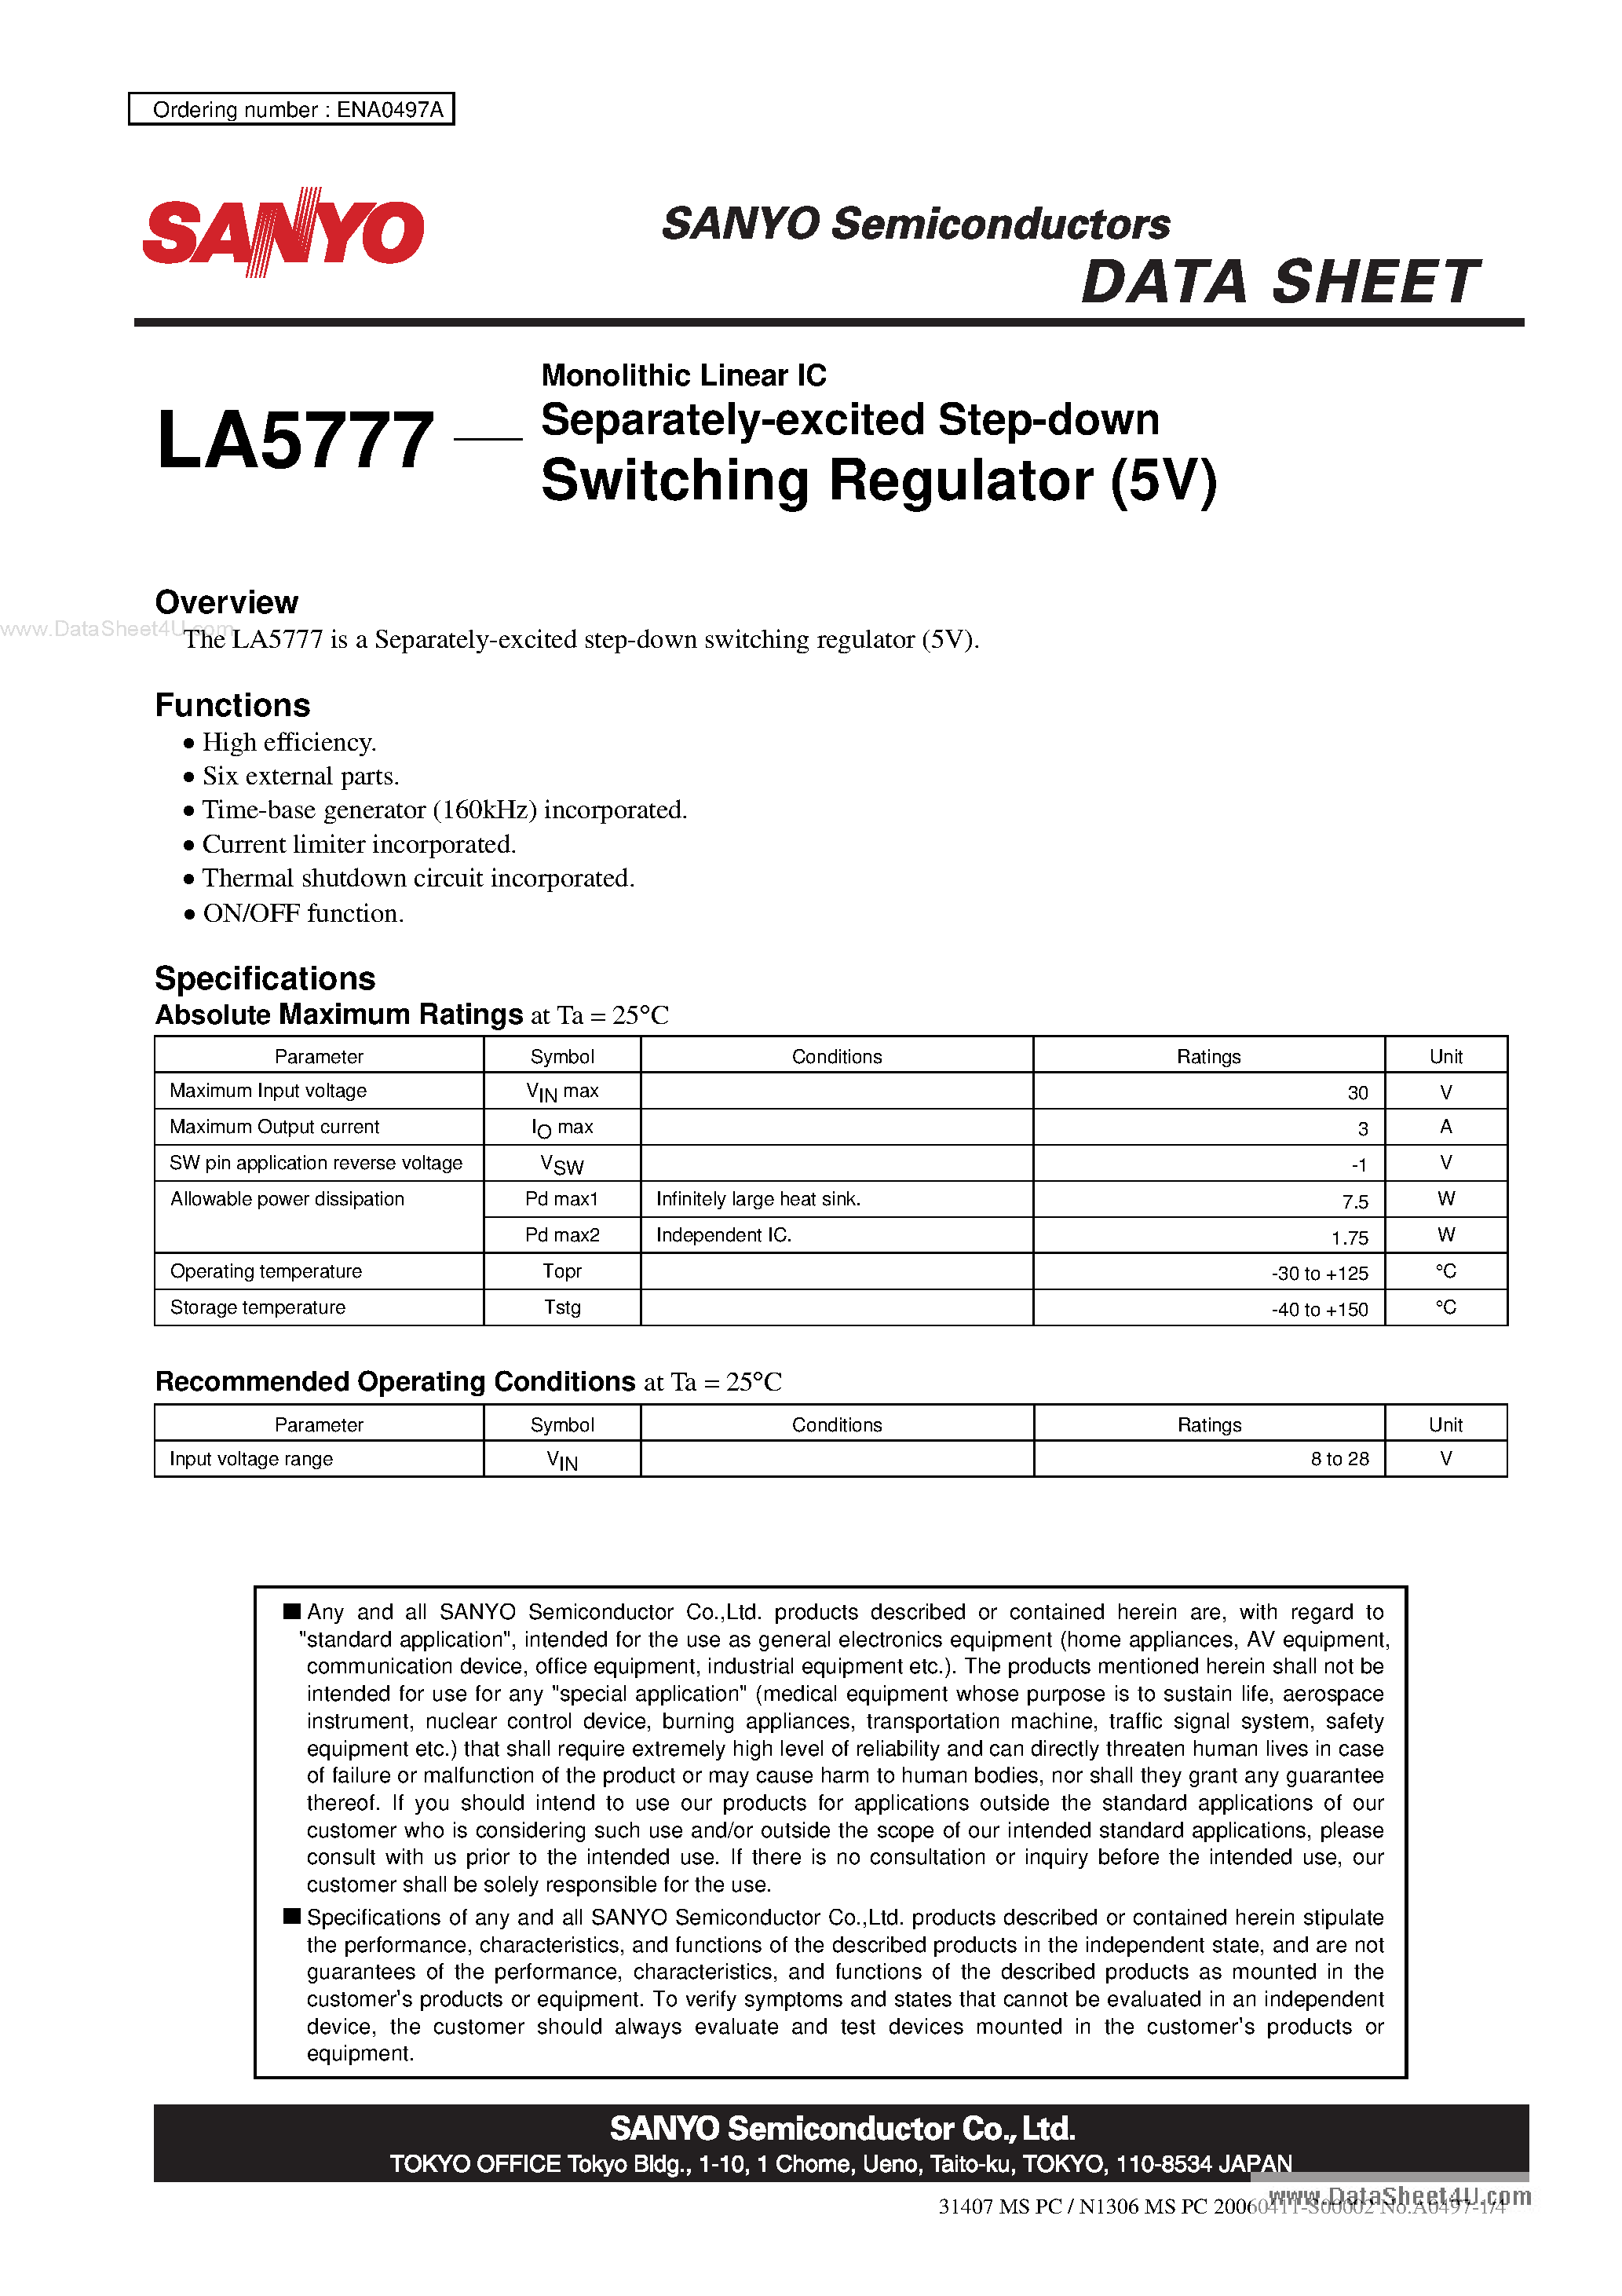 Даташит LA5777-Monolithic Linear IC Separately-excited Step-down Switching Regulator страница 1